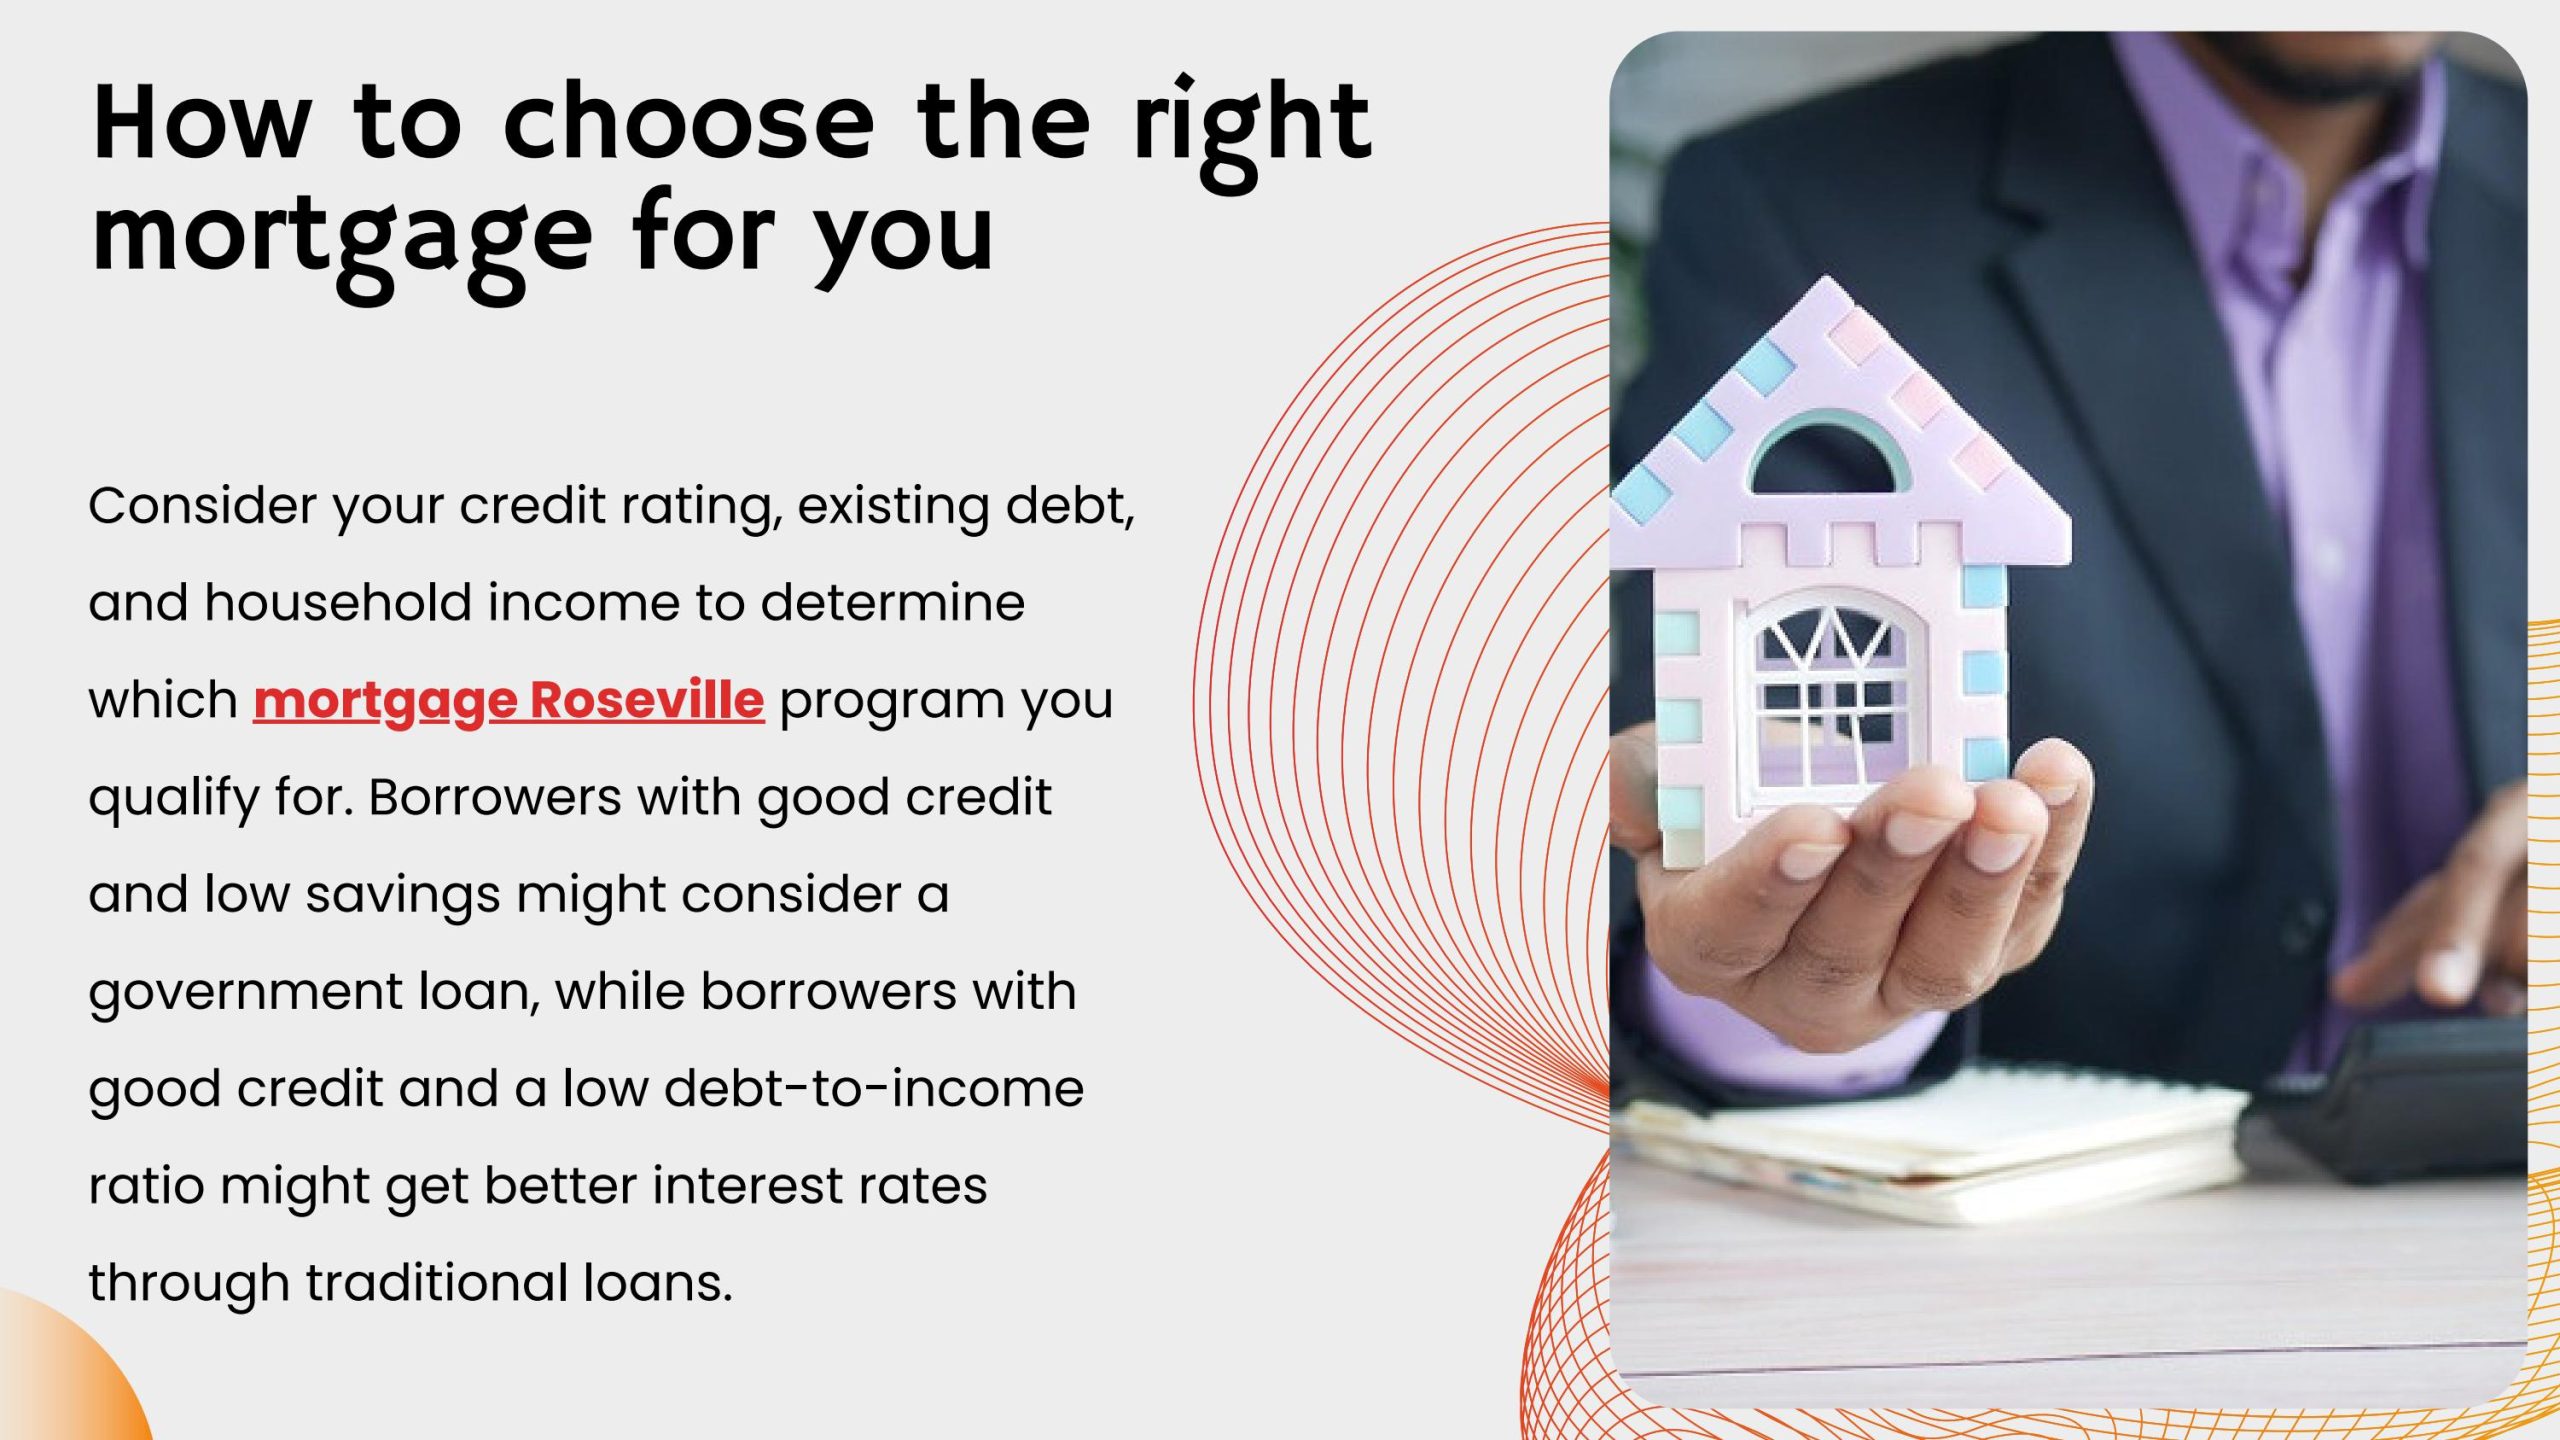 How to choose the right mortgage for you